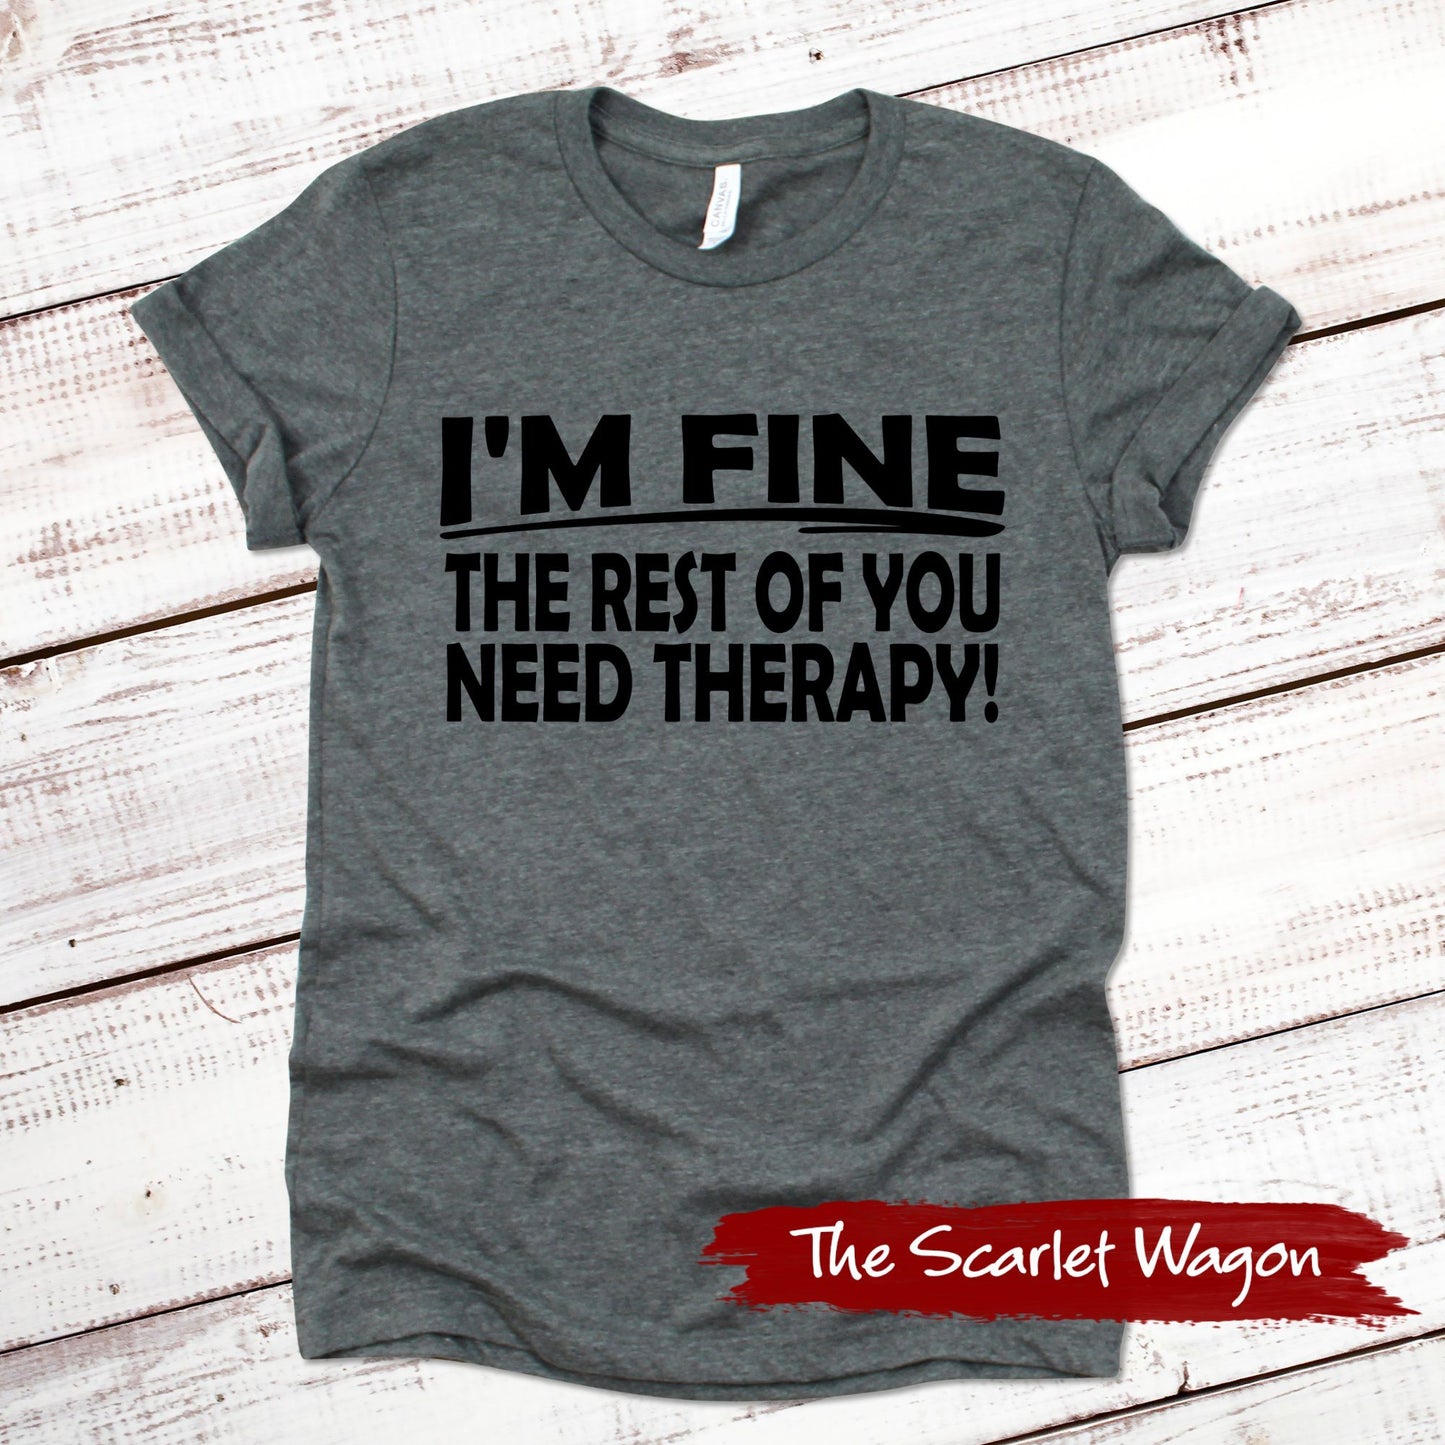 I'm Fine the Rest of You Need Therapy Funny Shirt Scarlet Wagon Deep Heather Gray XS 